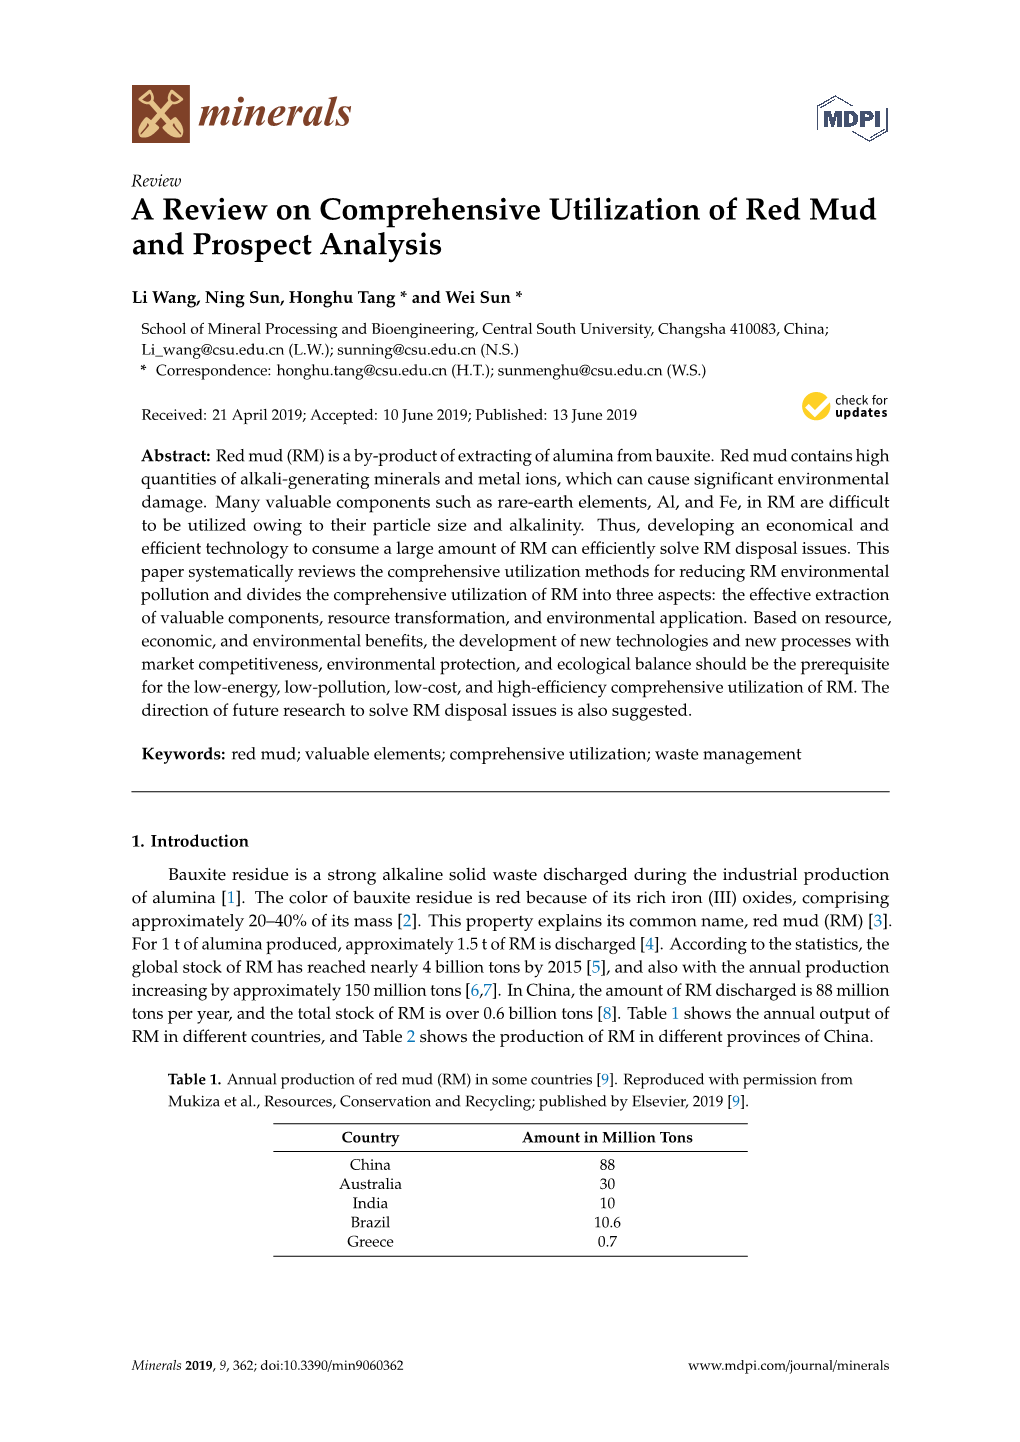 A Review on Comprehensive Utilization of Red Mud and Prospect Analysis